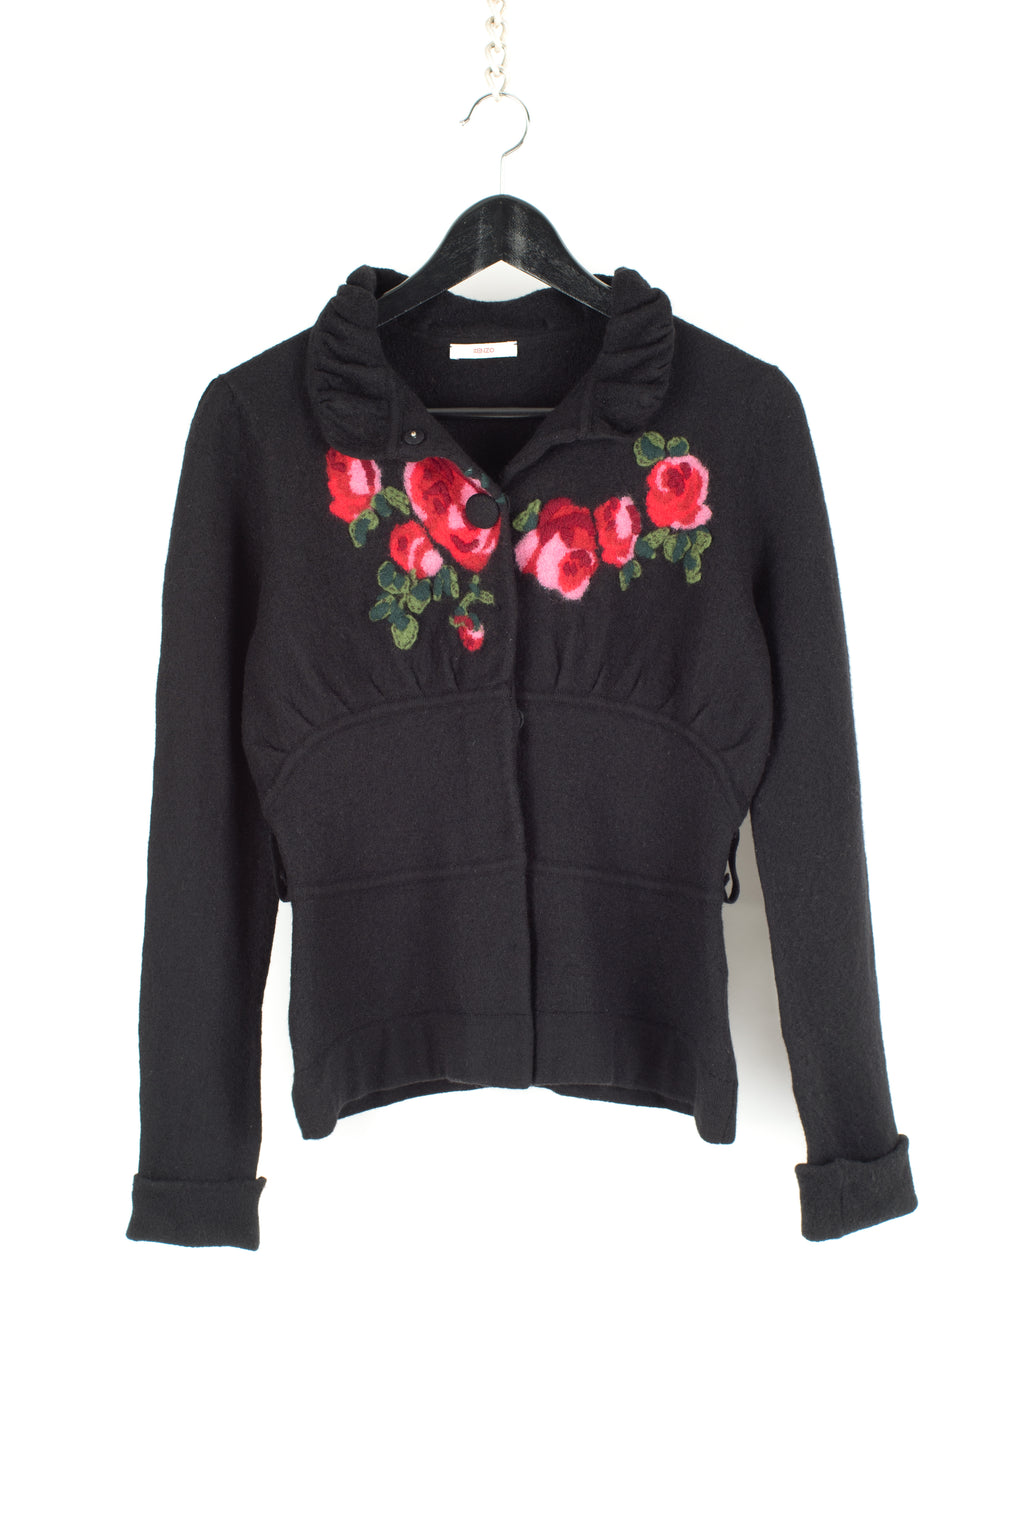 Kenzo Women's Black Boiled Wool Cardigan With Roses, XS